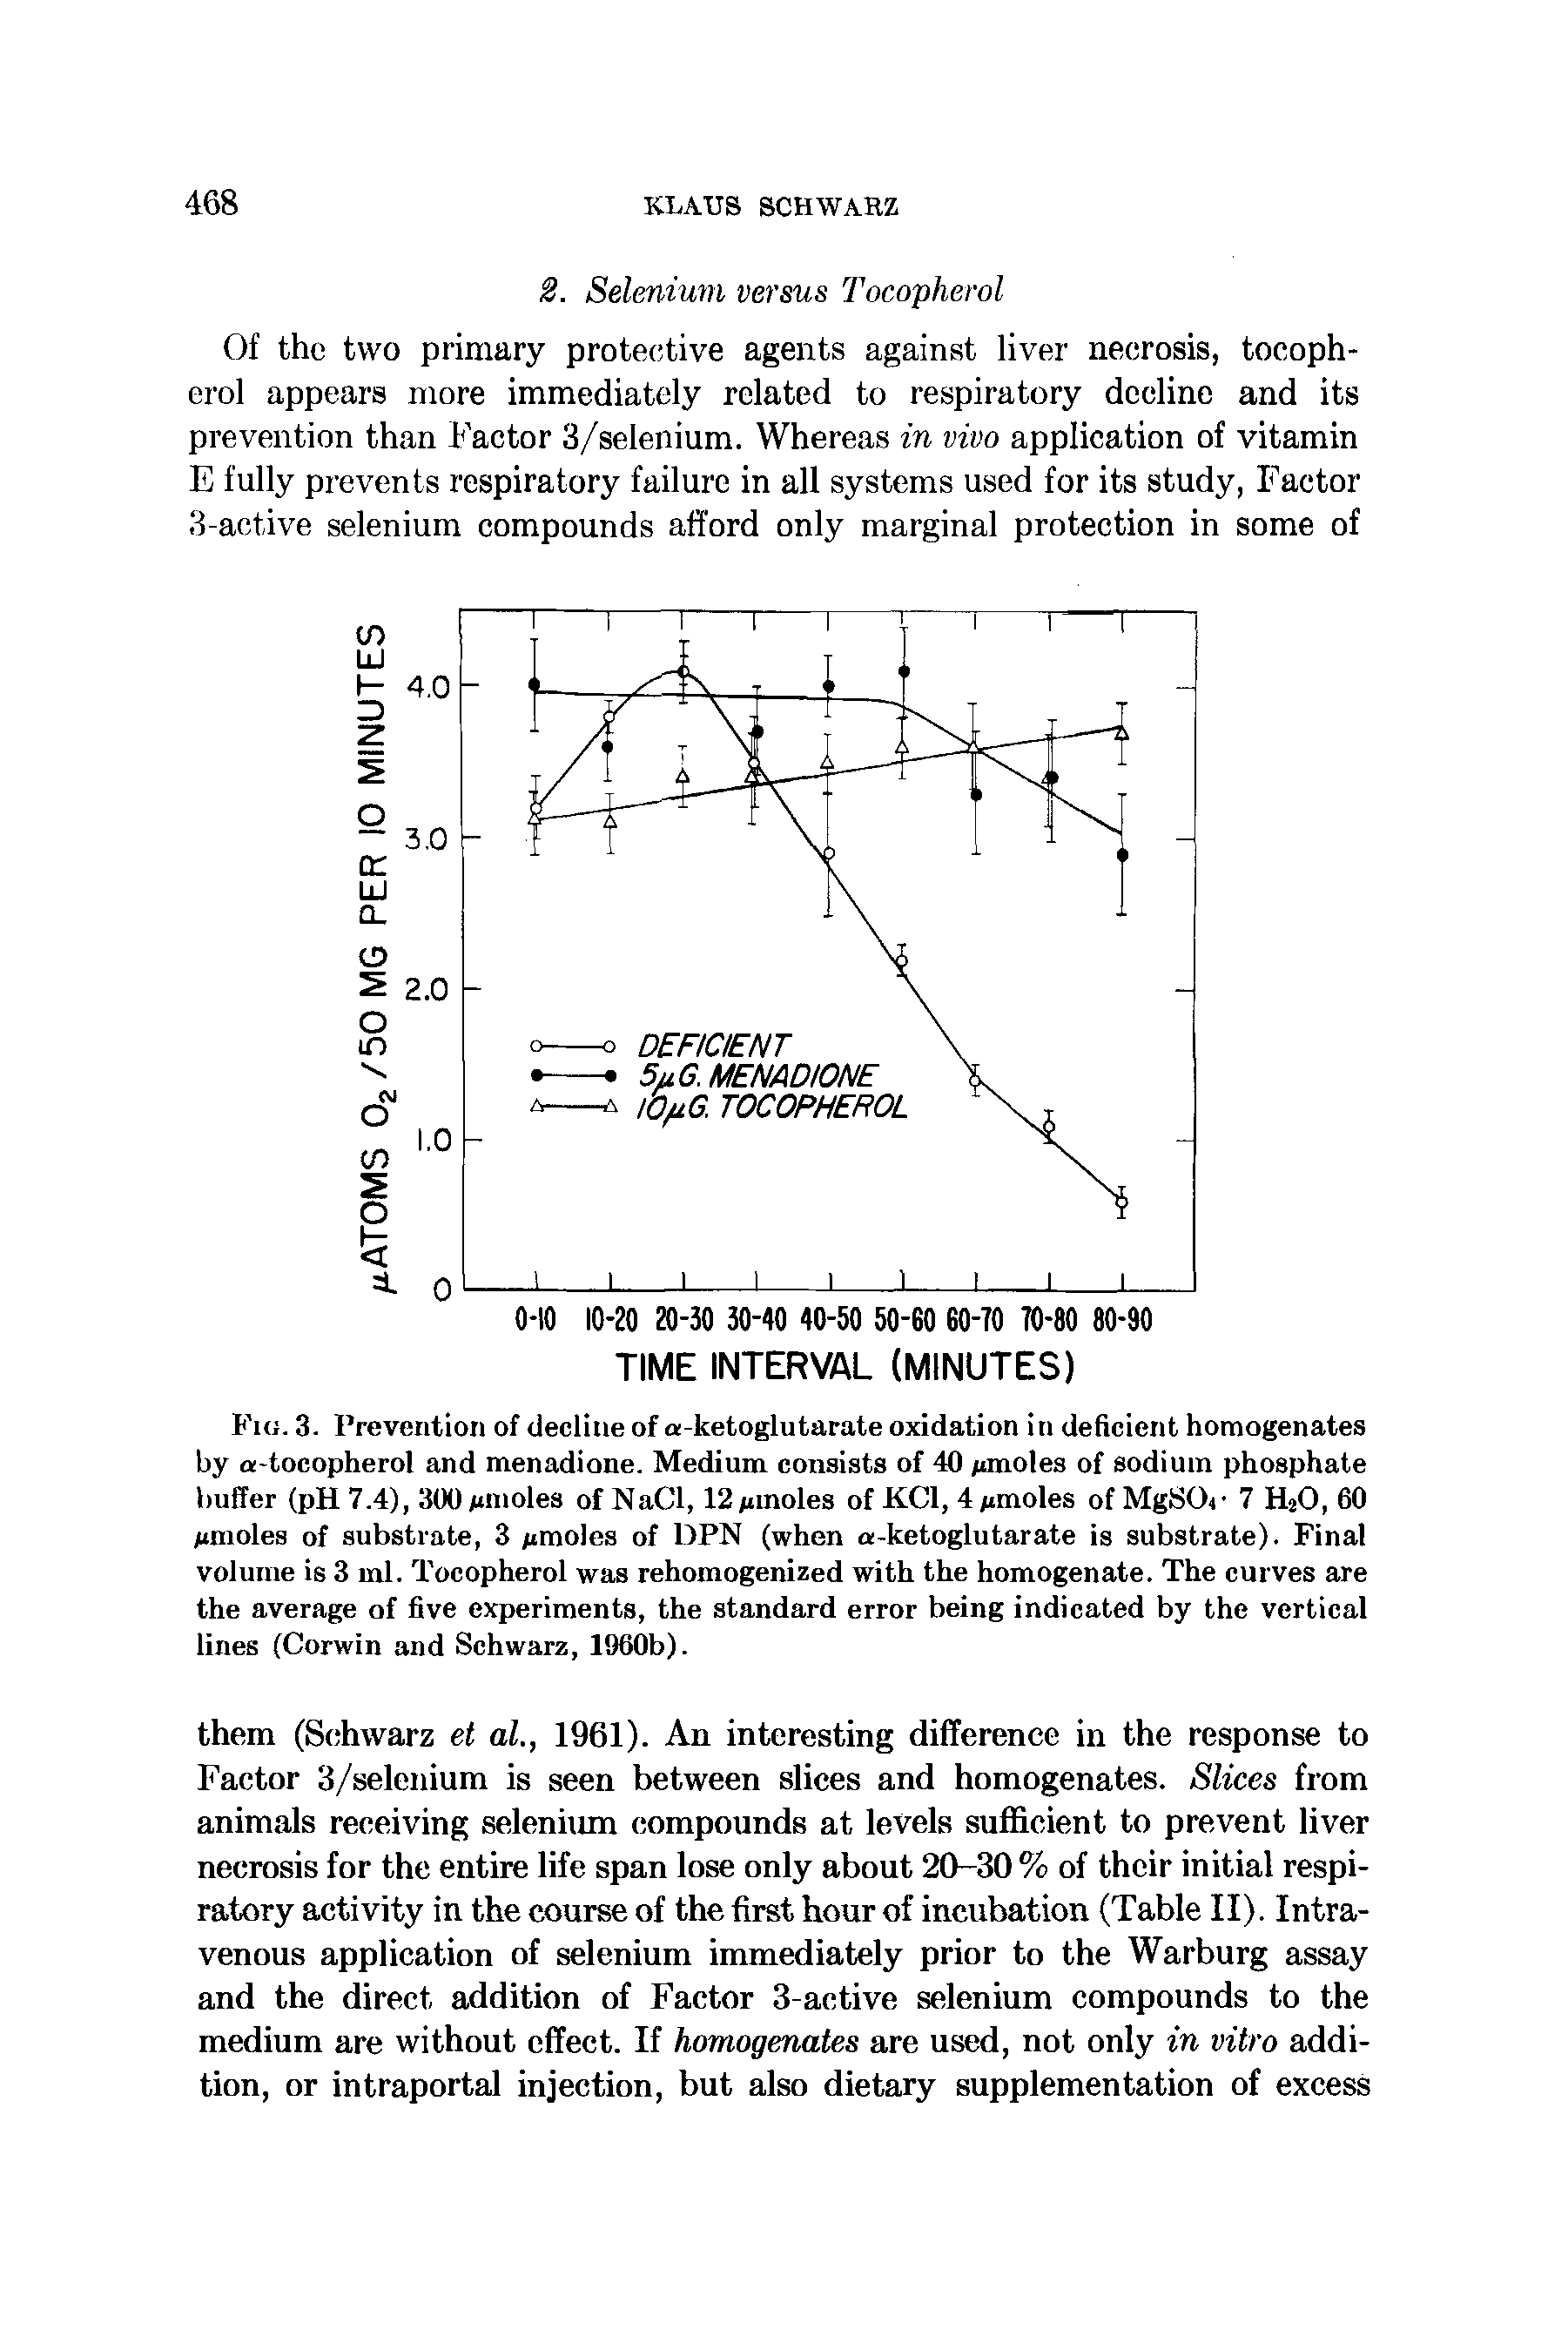 Fig. 3. Prevention of decline of a-ketoglutarate oxidation in deficient homogenates by a-tocopherol and menadione. Medium consists of 40 iimoles of sodium phosphate buffer (pH 7.4), 300 pinoles ofNaCl, 12pinoles of KCl, 4pmoles ofMgSO - 7 HjO, 60 pmoles of substrate, 3 pmoles of DPN (when a-ketoglutarate is substrate). Final volume is 3 ml. Tocopherol was rehomogenized with the homogenate. The curves are the average of five experiments, the standard error being indicated by the vertical lines (Corwin and Schwarz, 1960b).